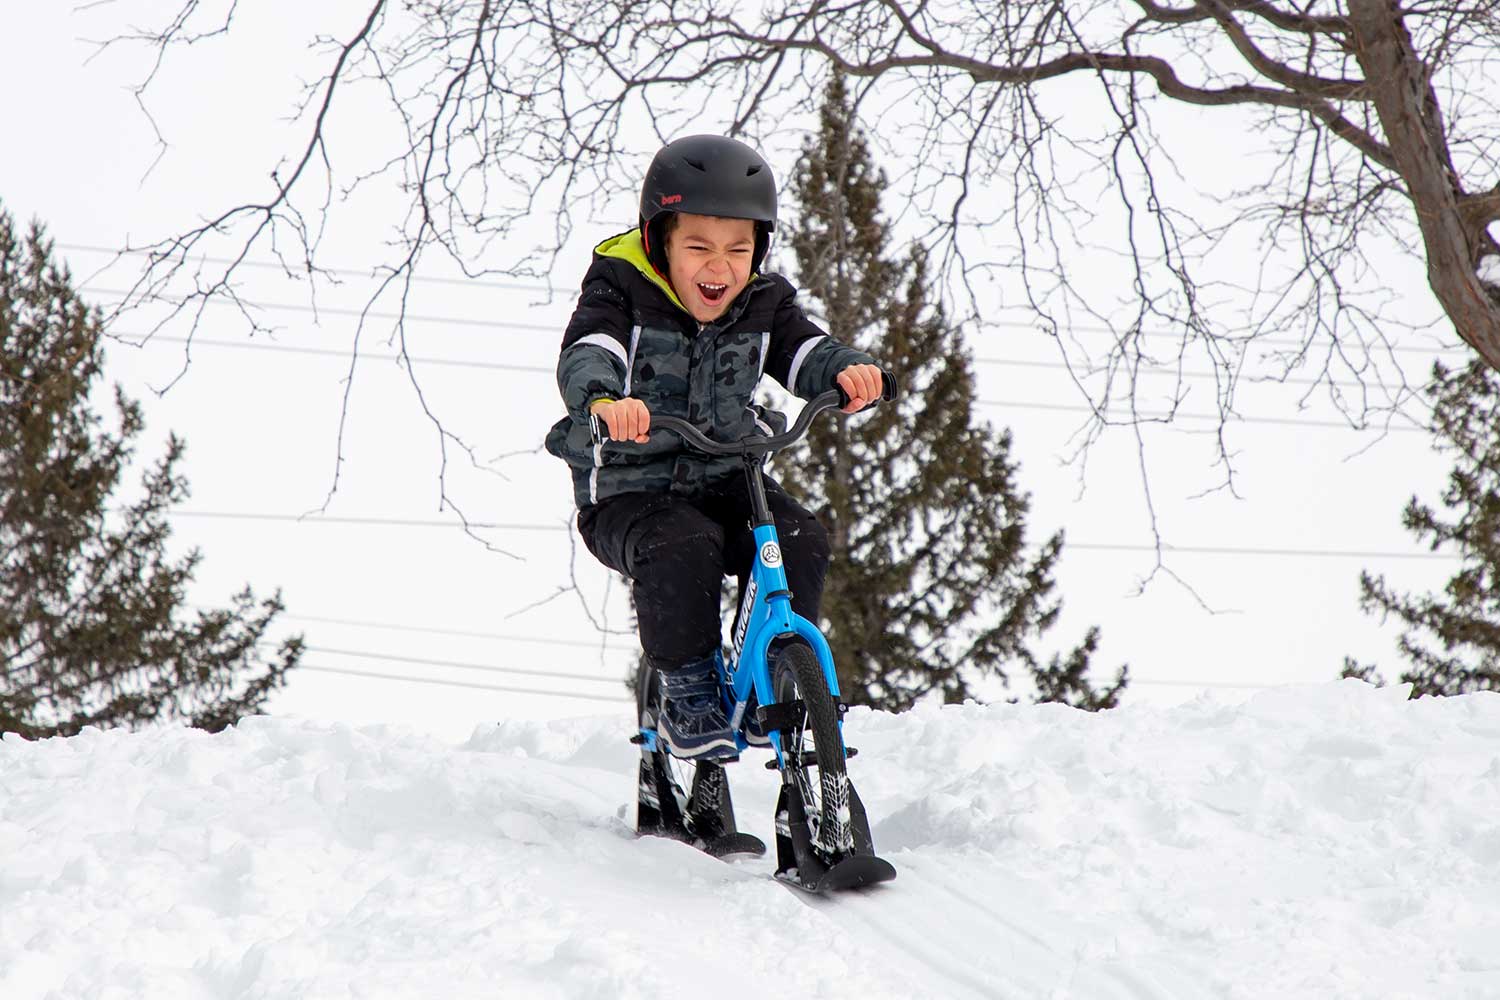 An excited boy rides downhill on a Strider bike with ski attachments